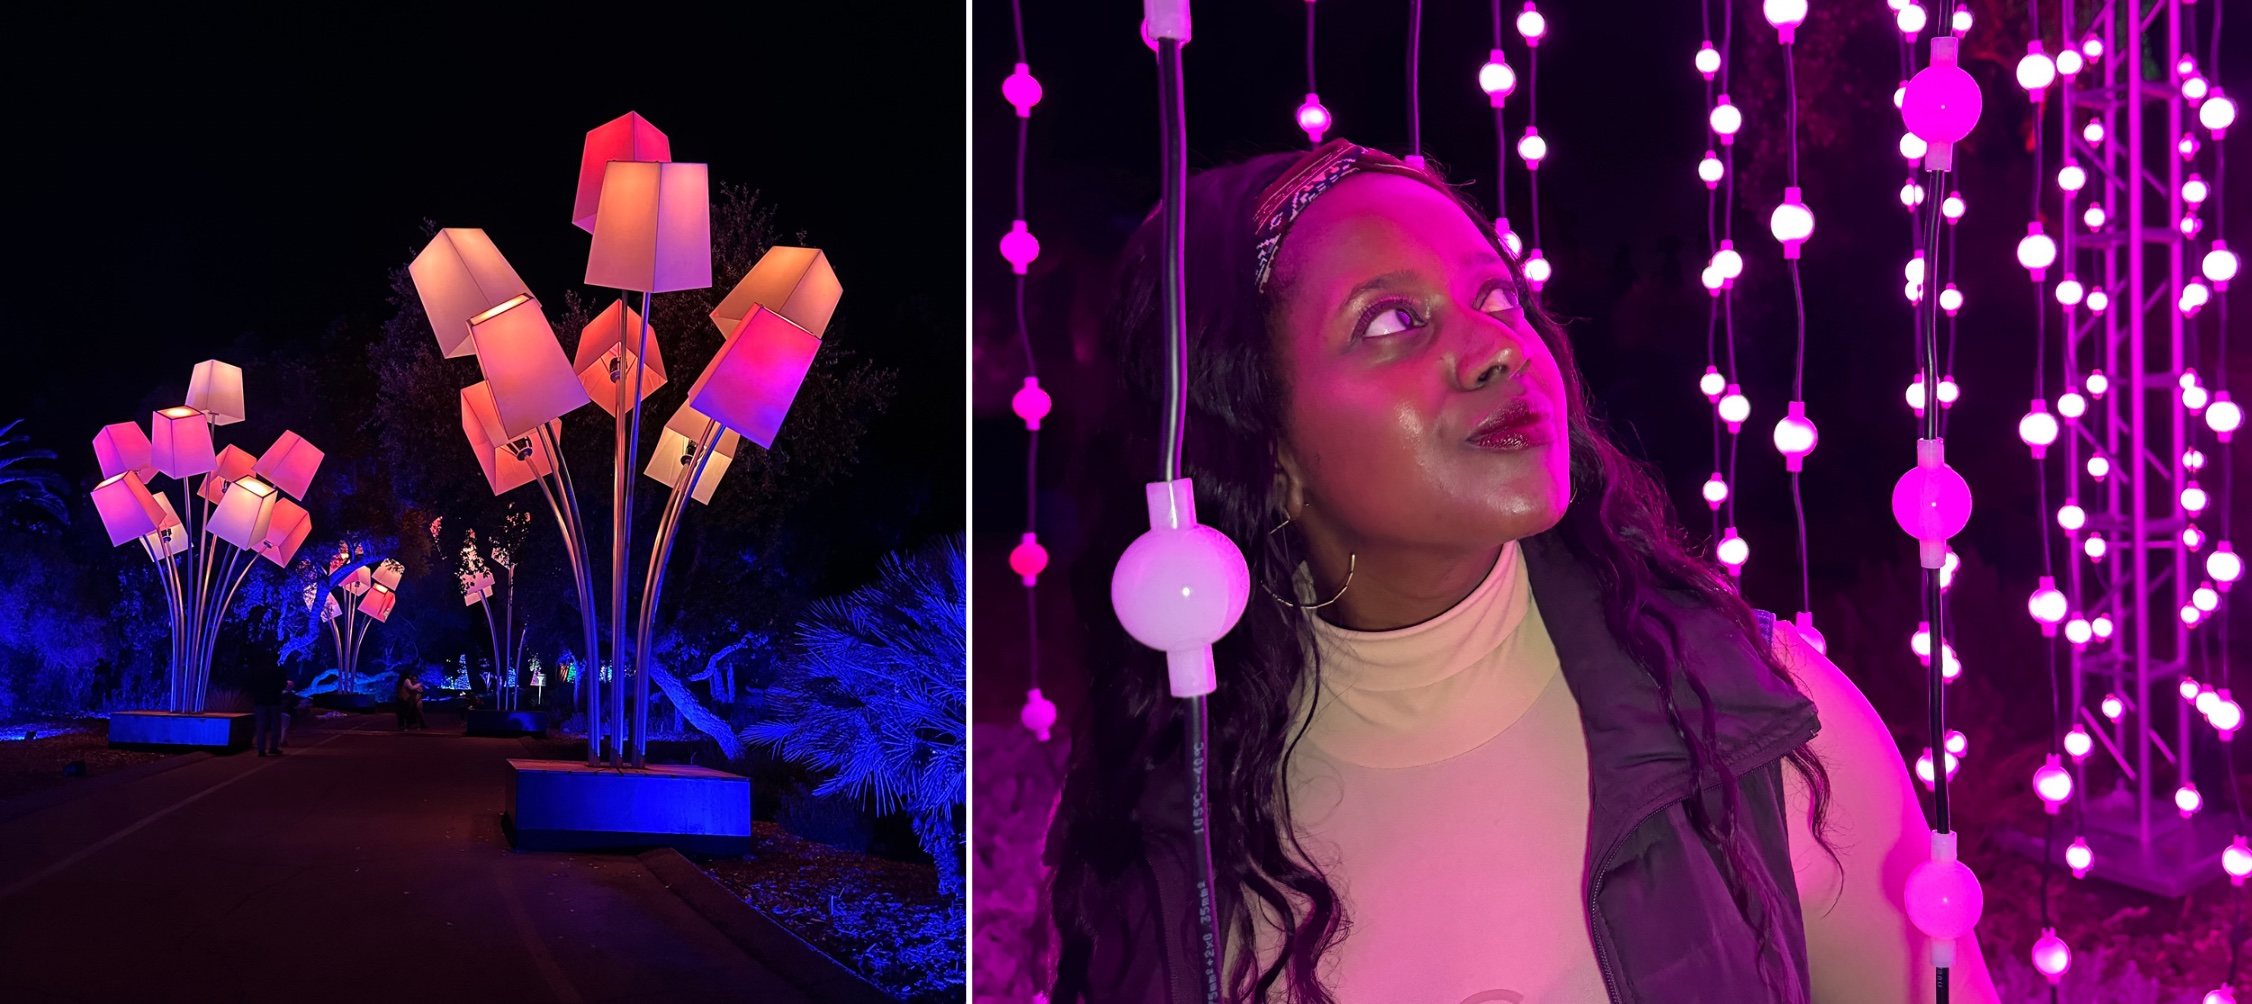 Light Up Your Holidays at LIGHTSCAPE, the Immersive Holiday Light Experience at the LA Arboretum